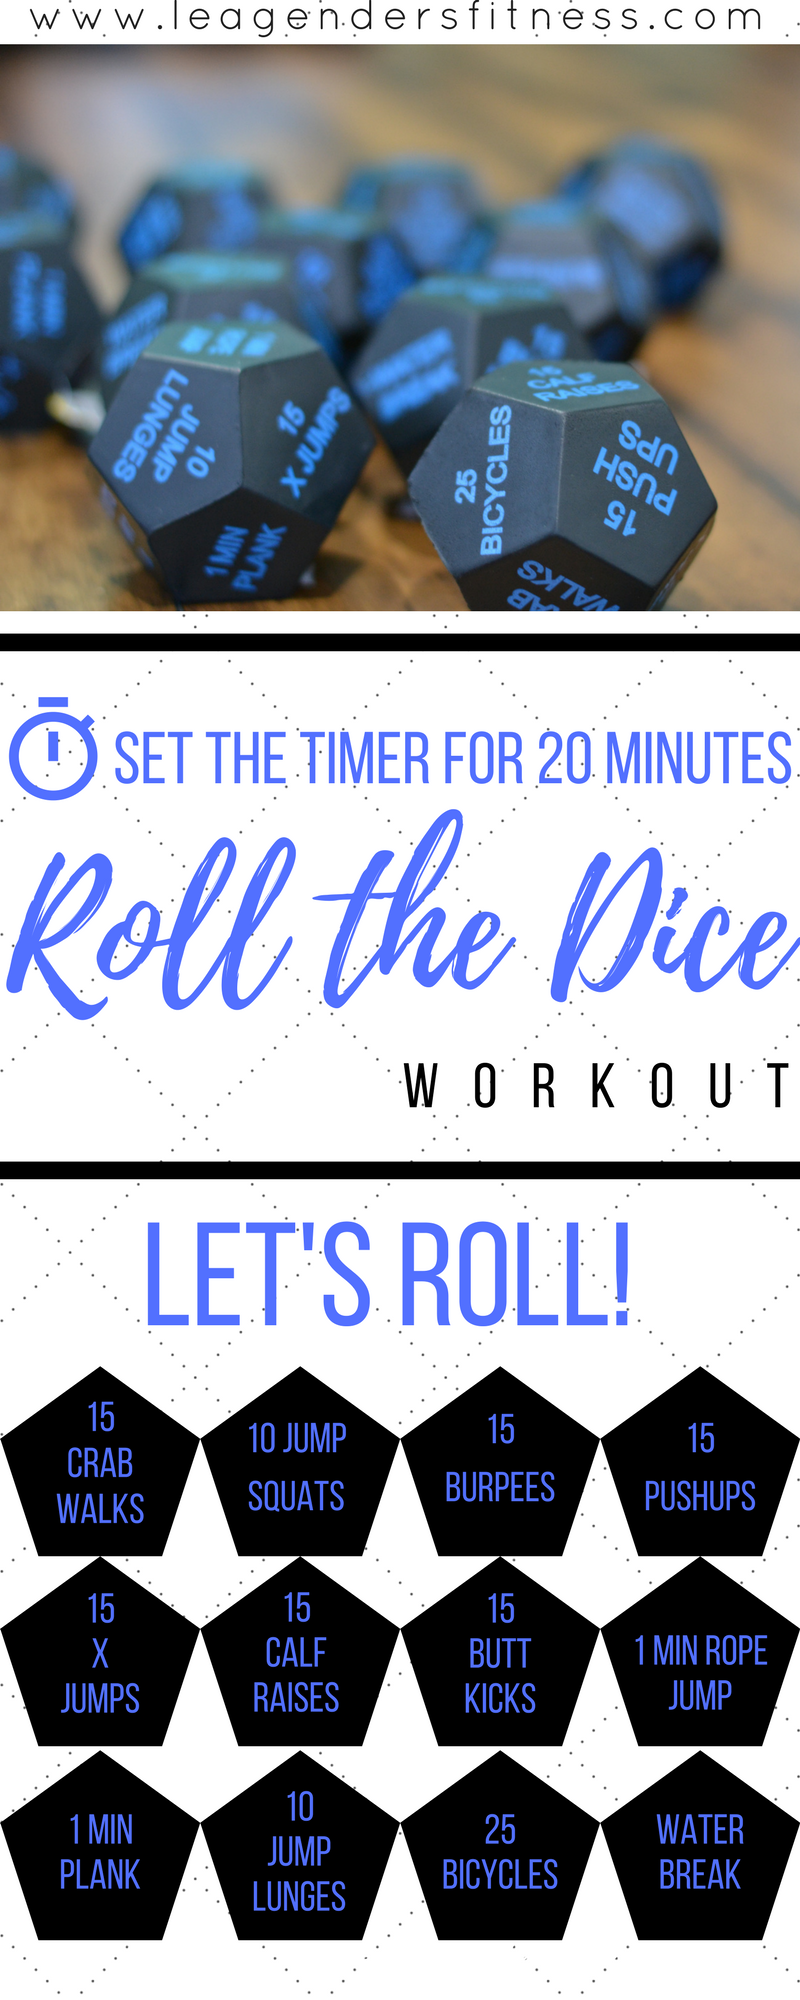 https://images.squarespace-cdn.com/content/v1/55bc0f3be4b07e0f753f5bd1/1513556675994-70571AZOULFPZ612XZIT/ROLL+THE+DICE+WORKOUT+VERSION+2.png